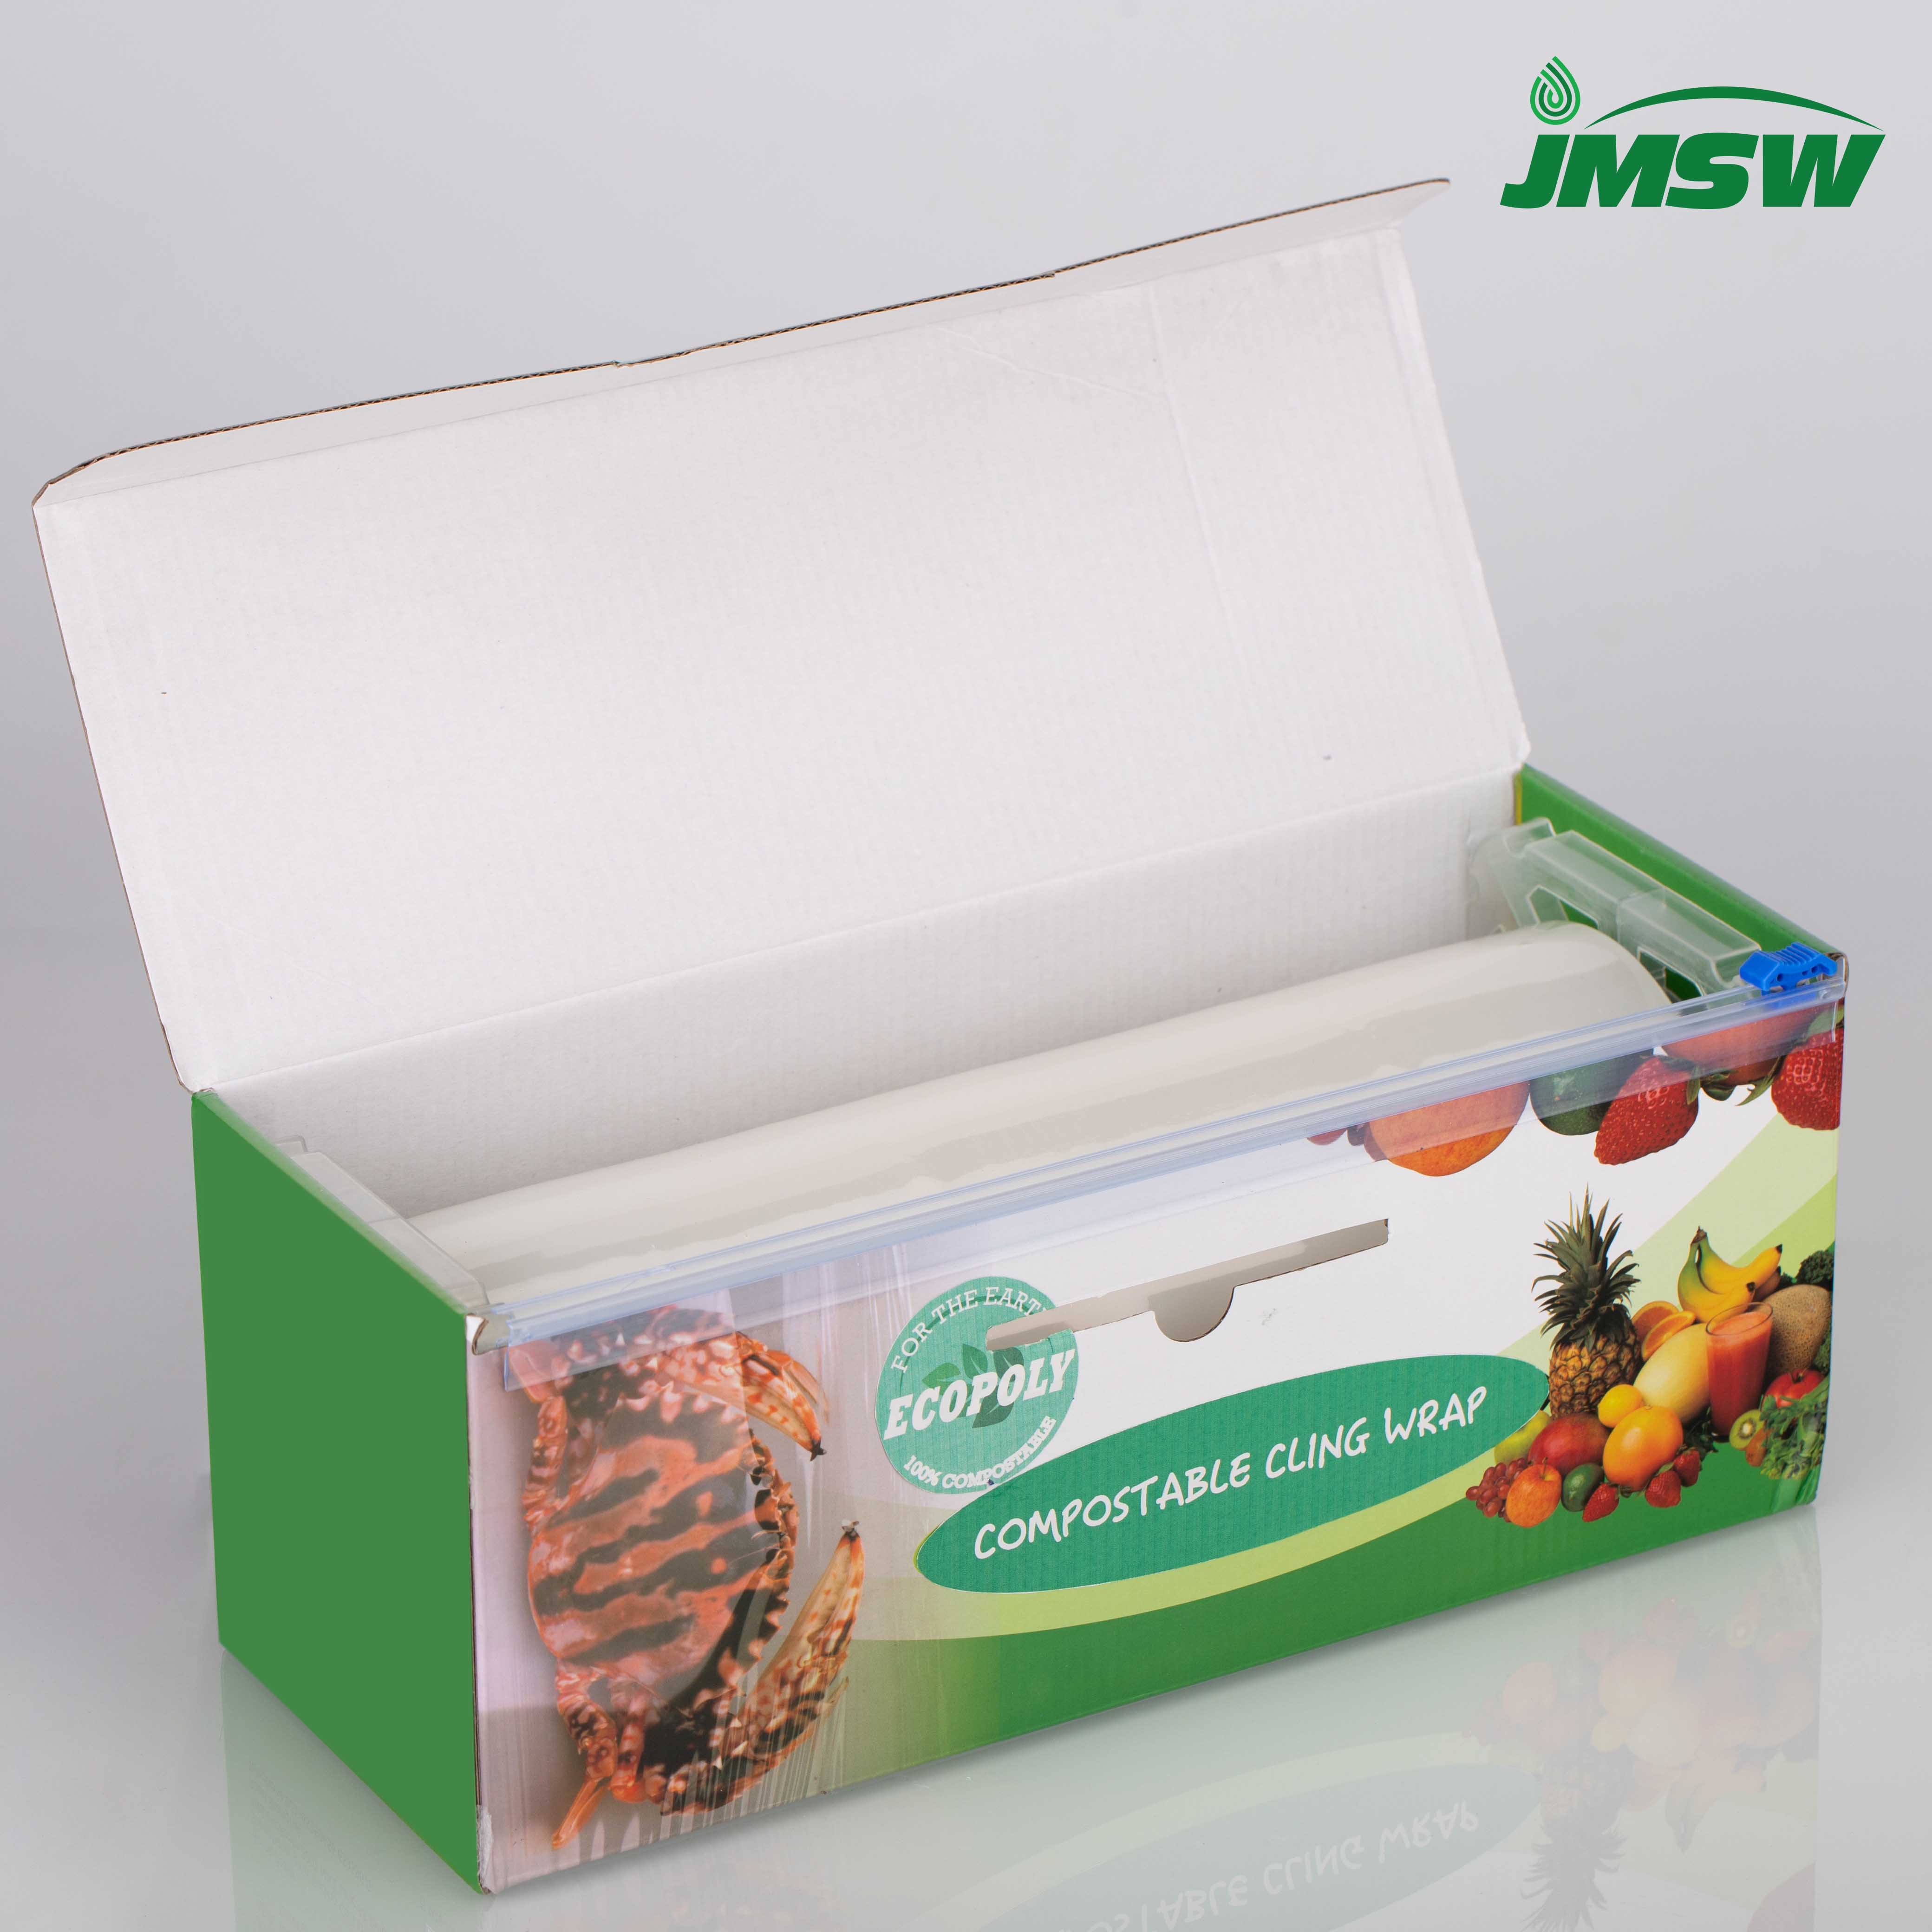 Compostable Cling Wrap-Commercial Use(图3)